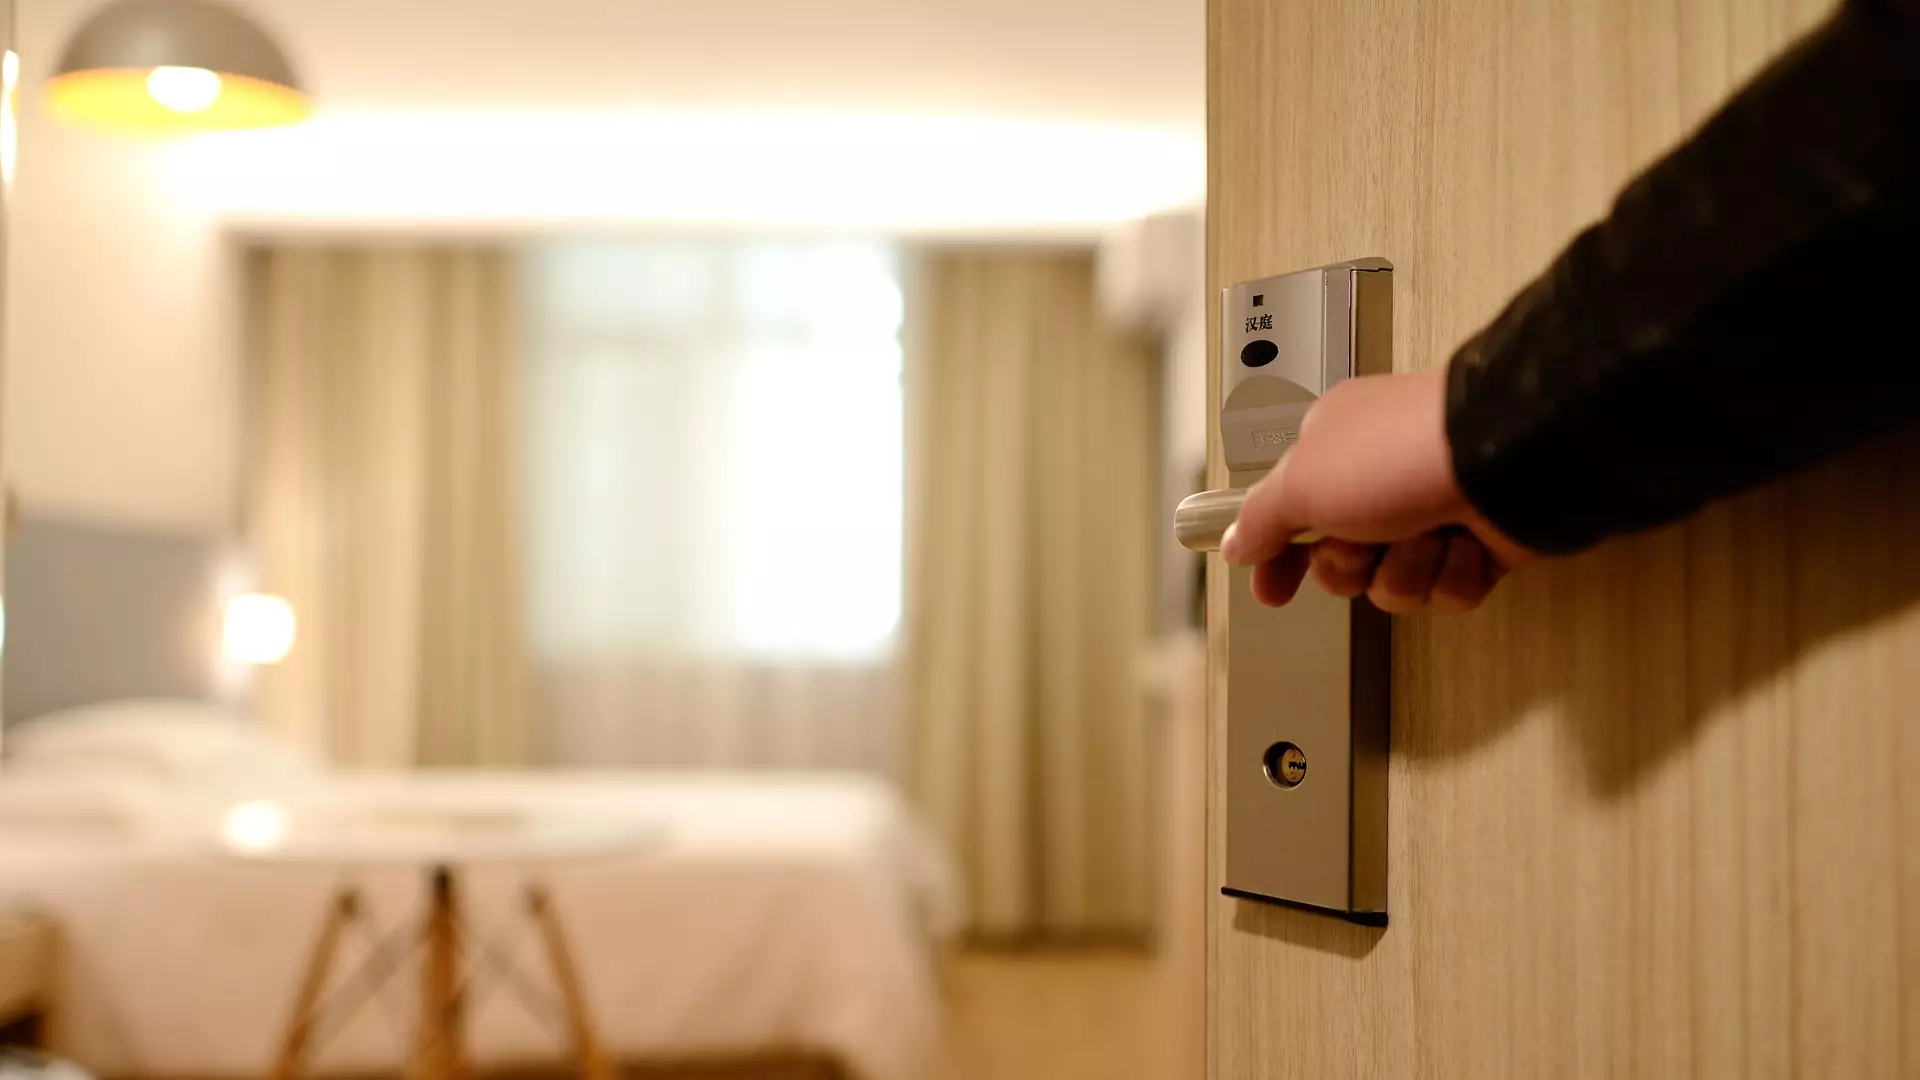 More Than 1,600 People Secretly Filmed In Hotel Rooms In South Korea